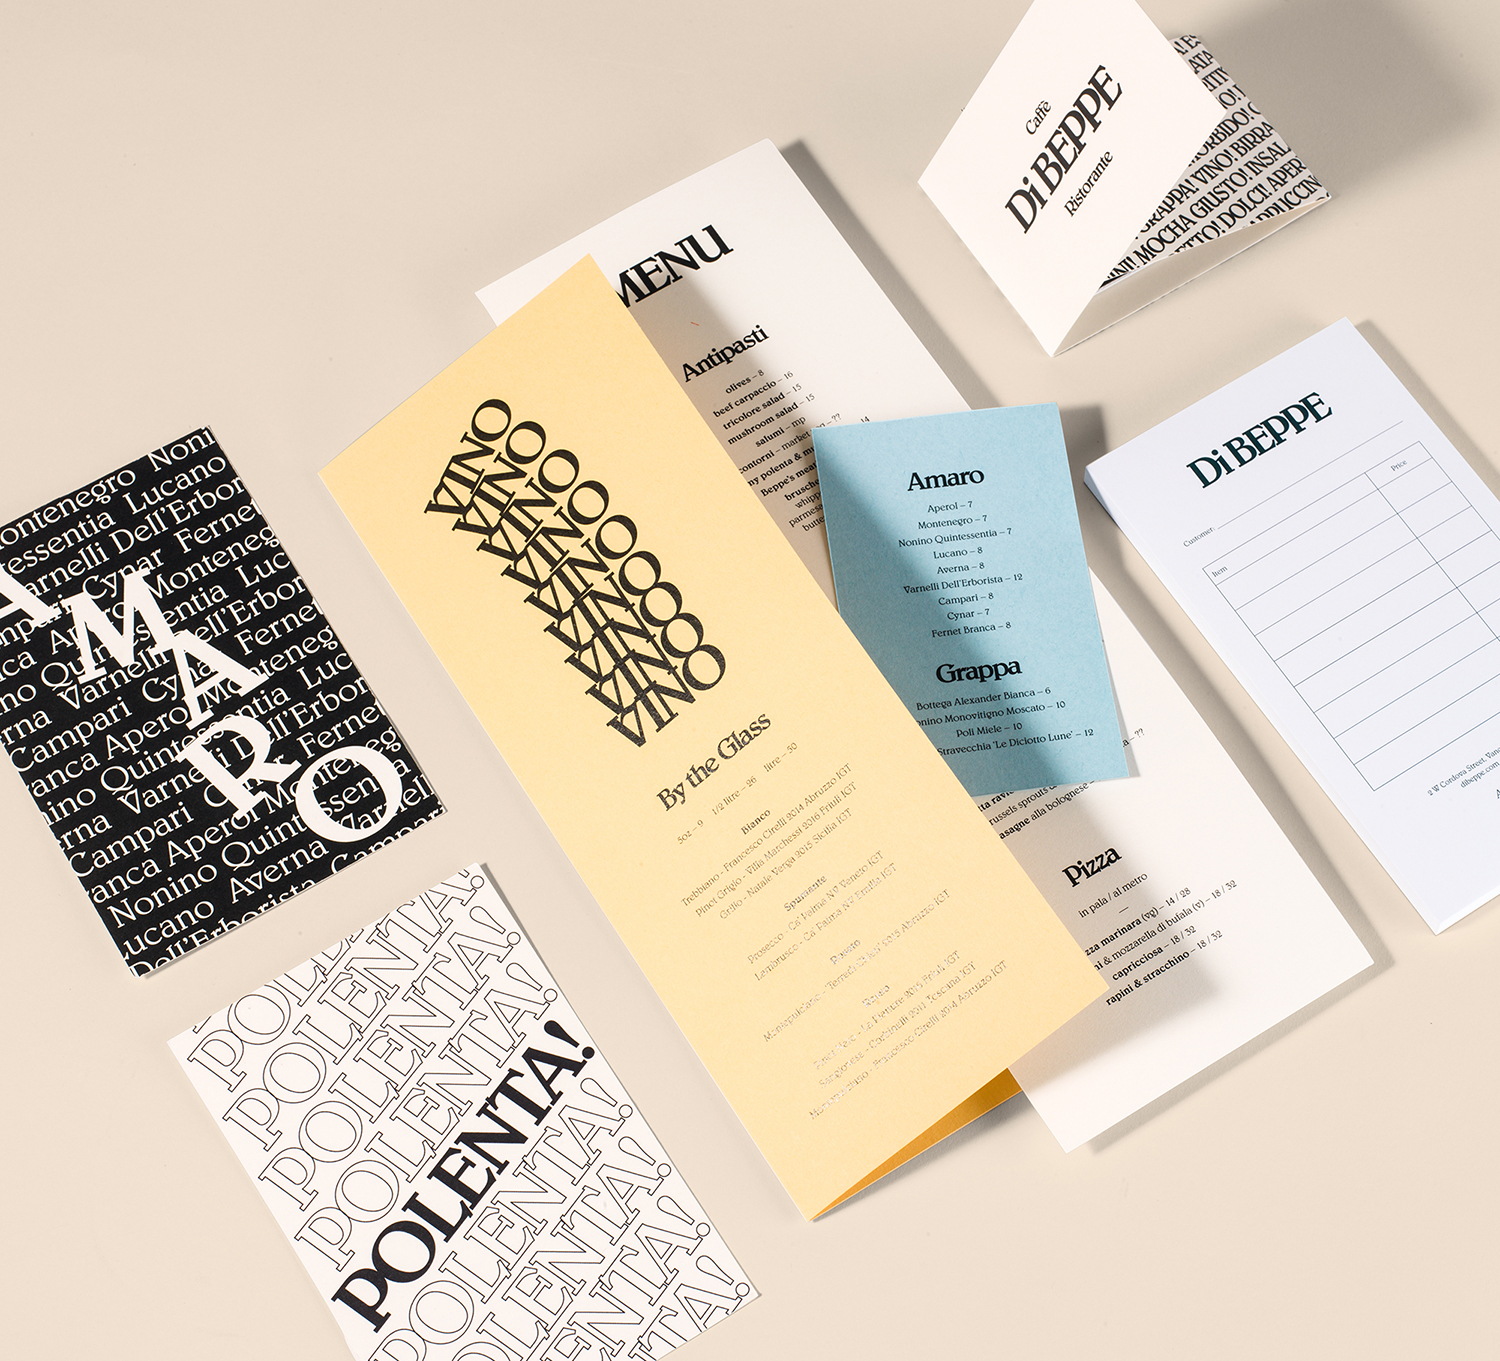 Logo, menu, gift card and postcard design by Glasfurd & Walker for Italian care and restaurant Di Beppe